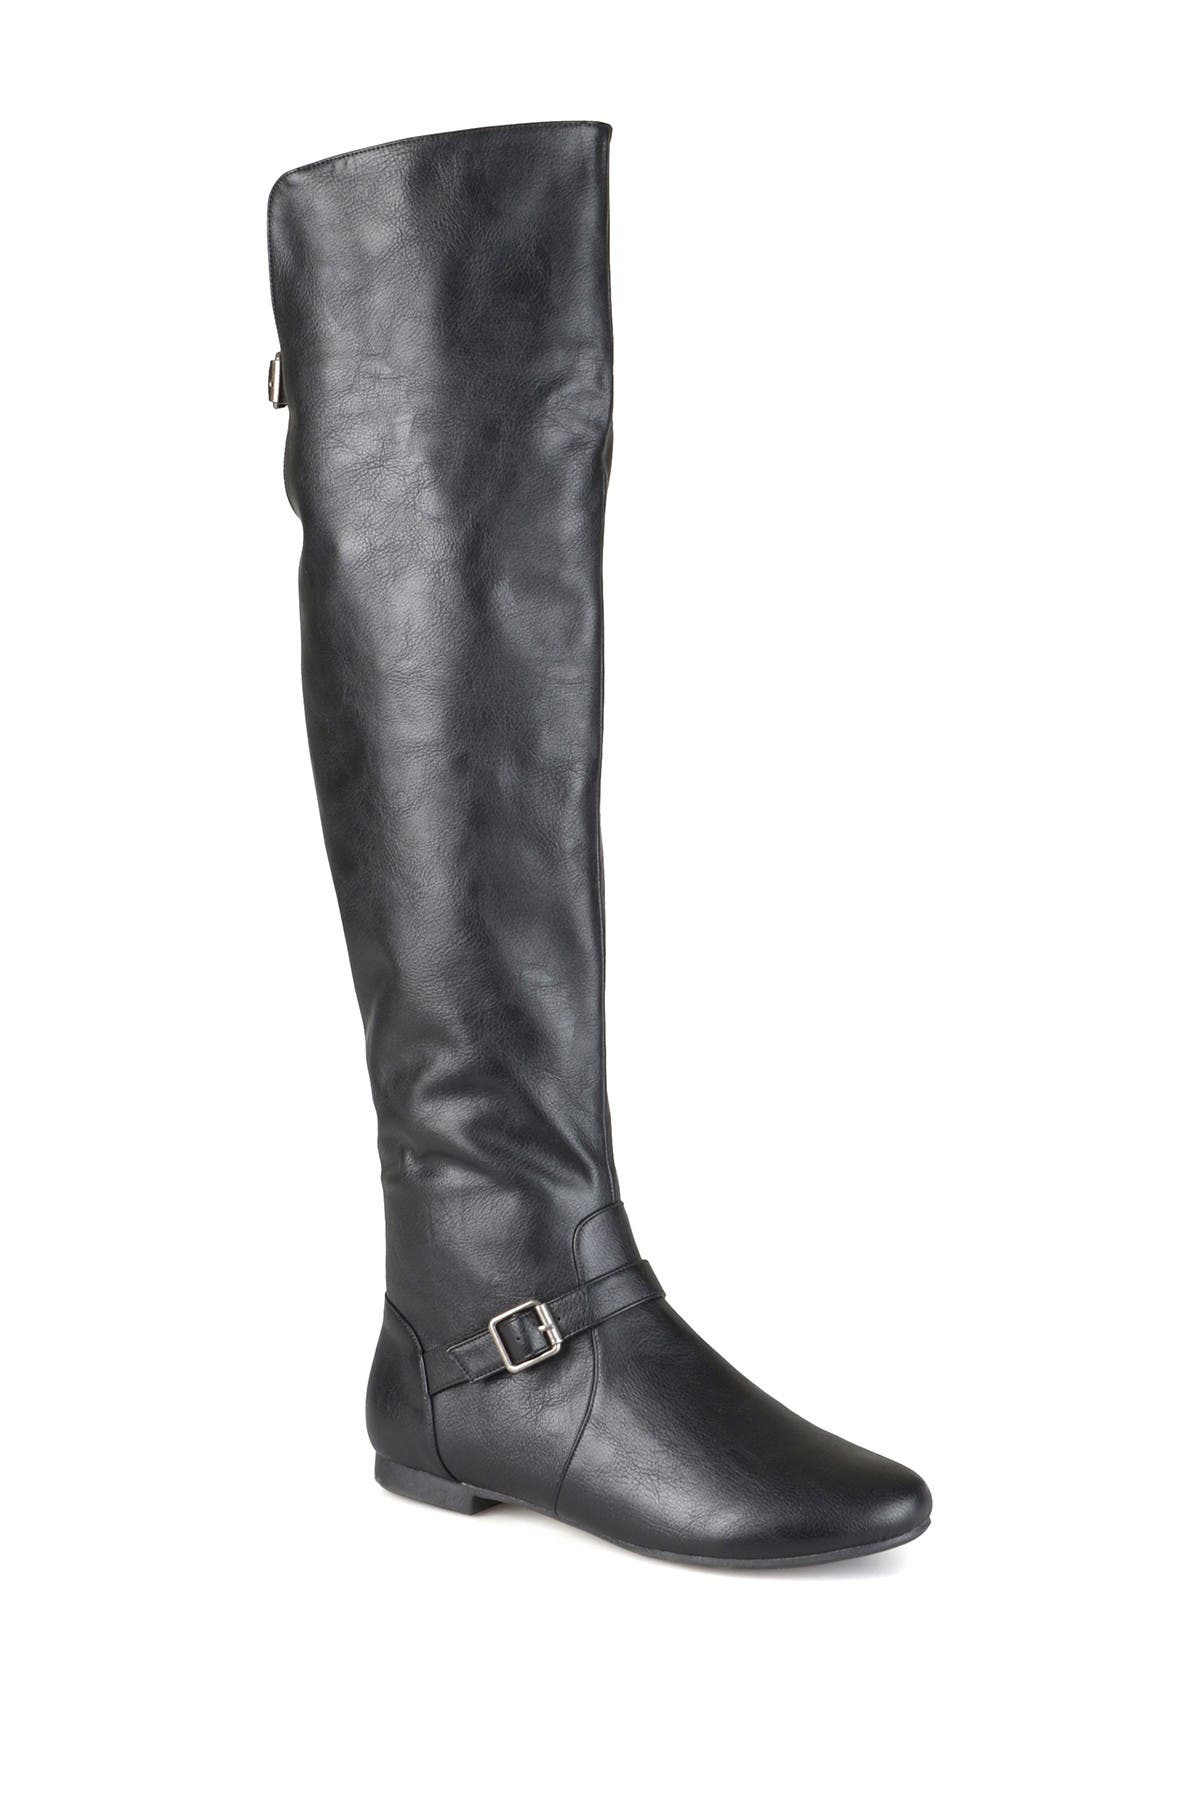 journee collection black boots